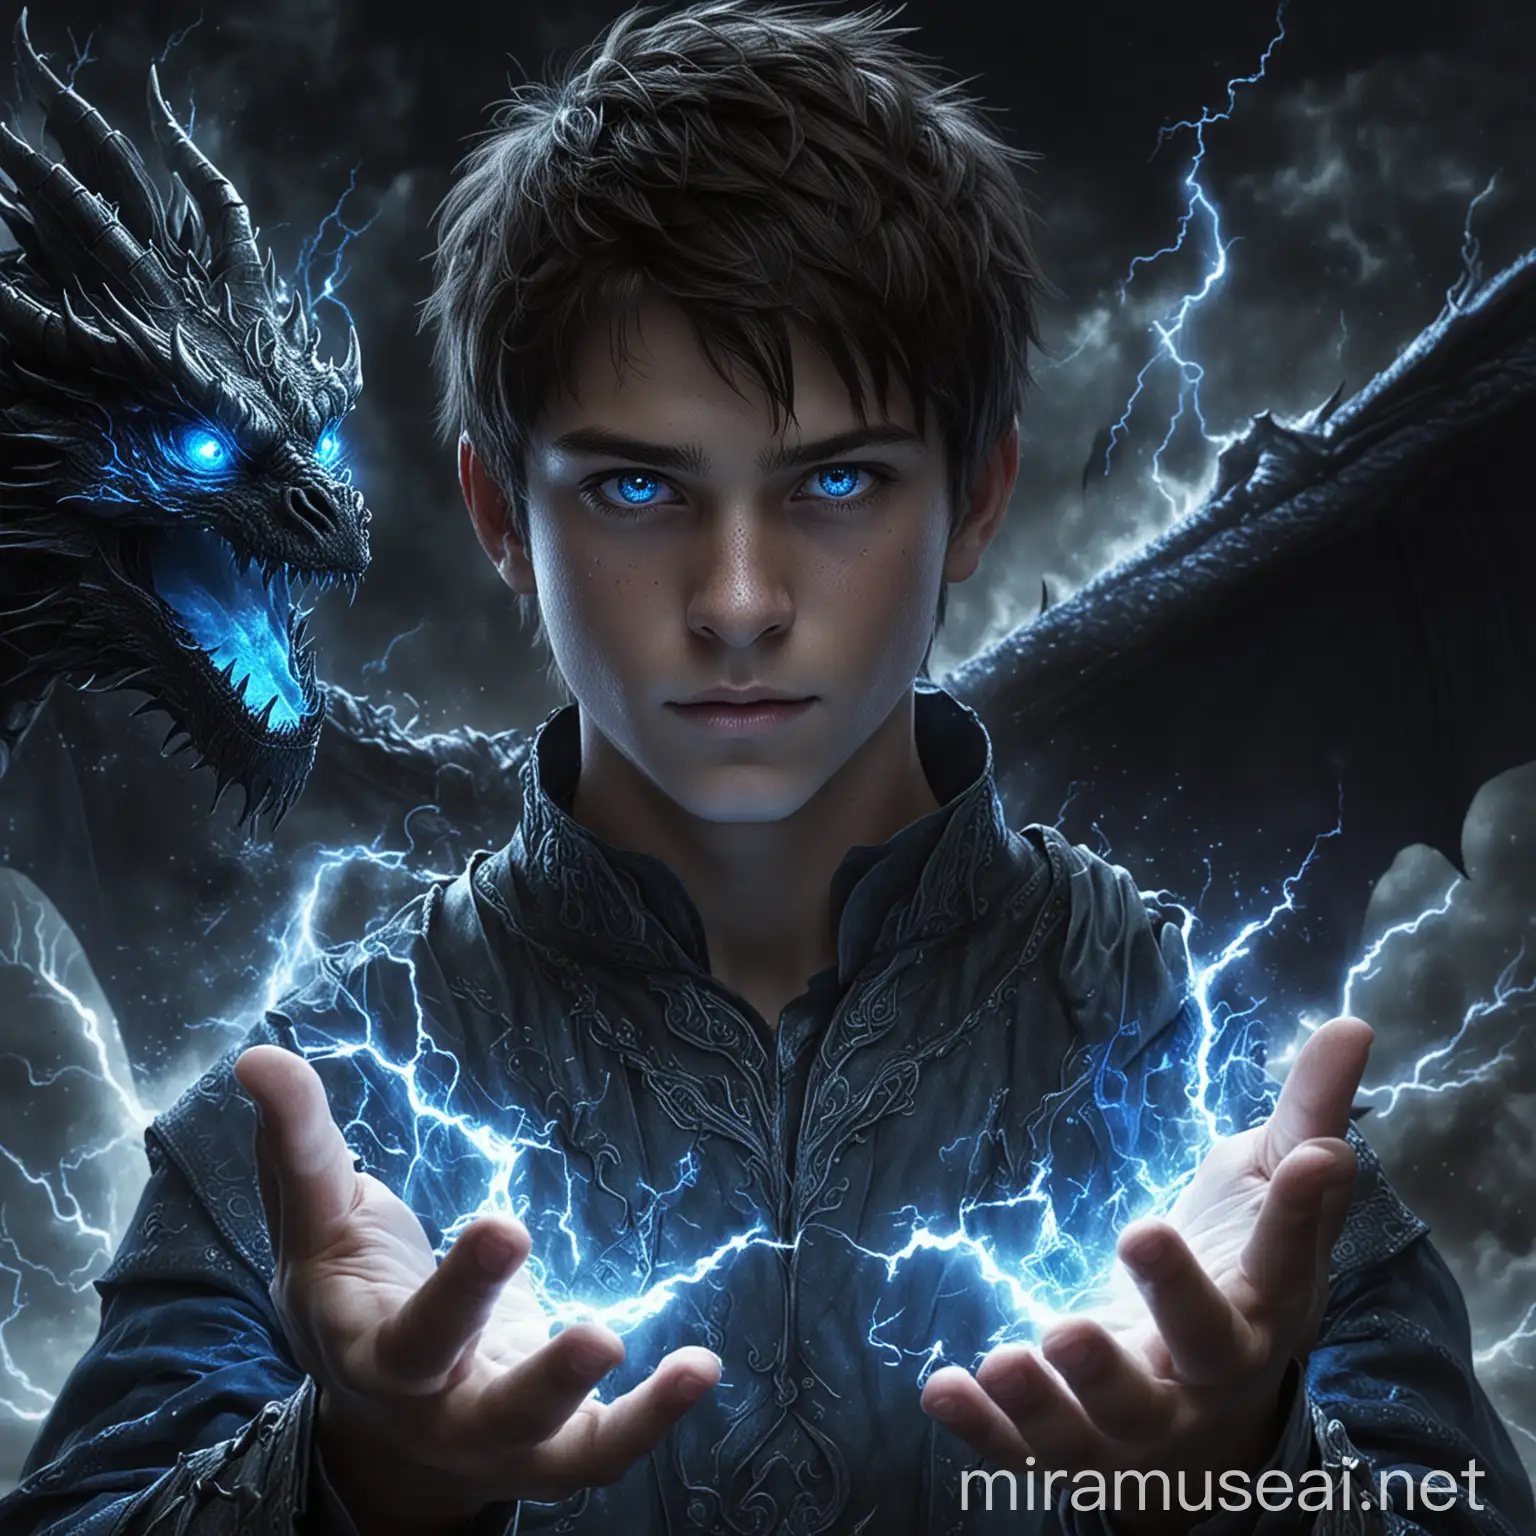 Prince with Blue Lightning and Black Dragon